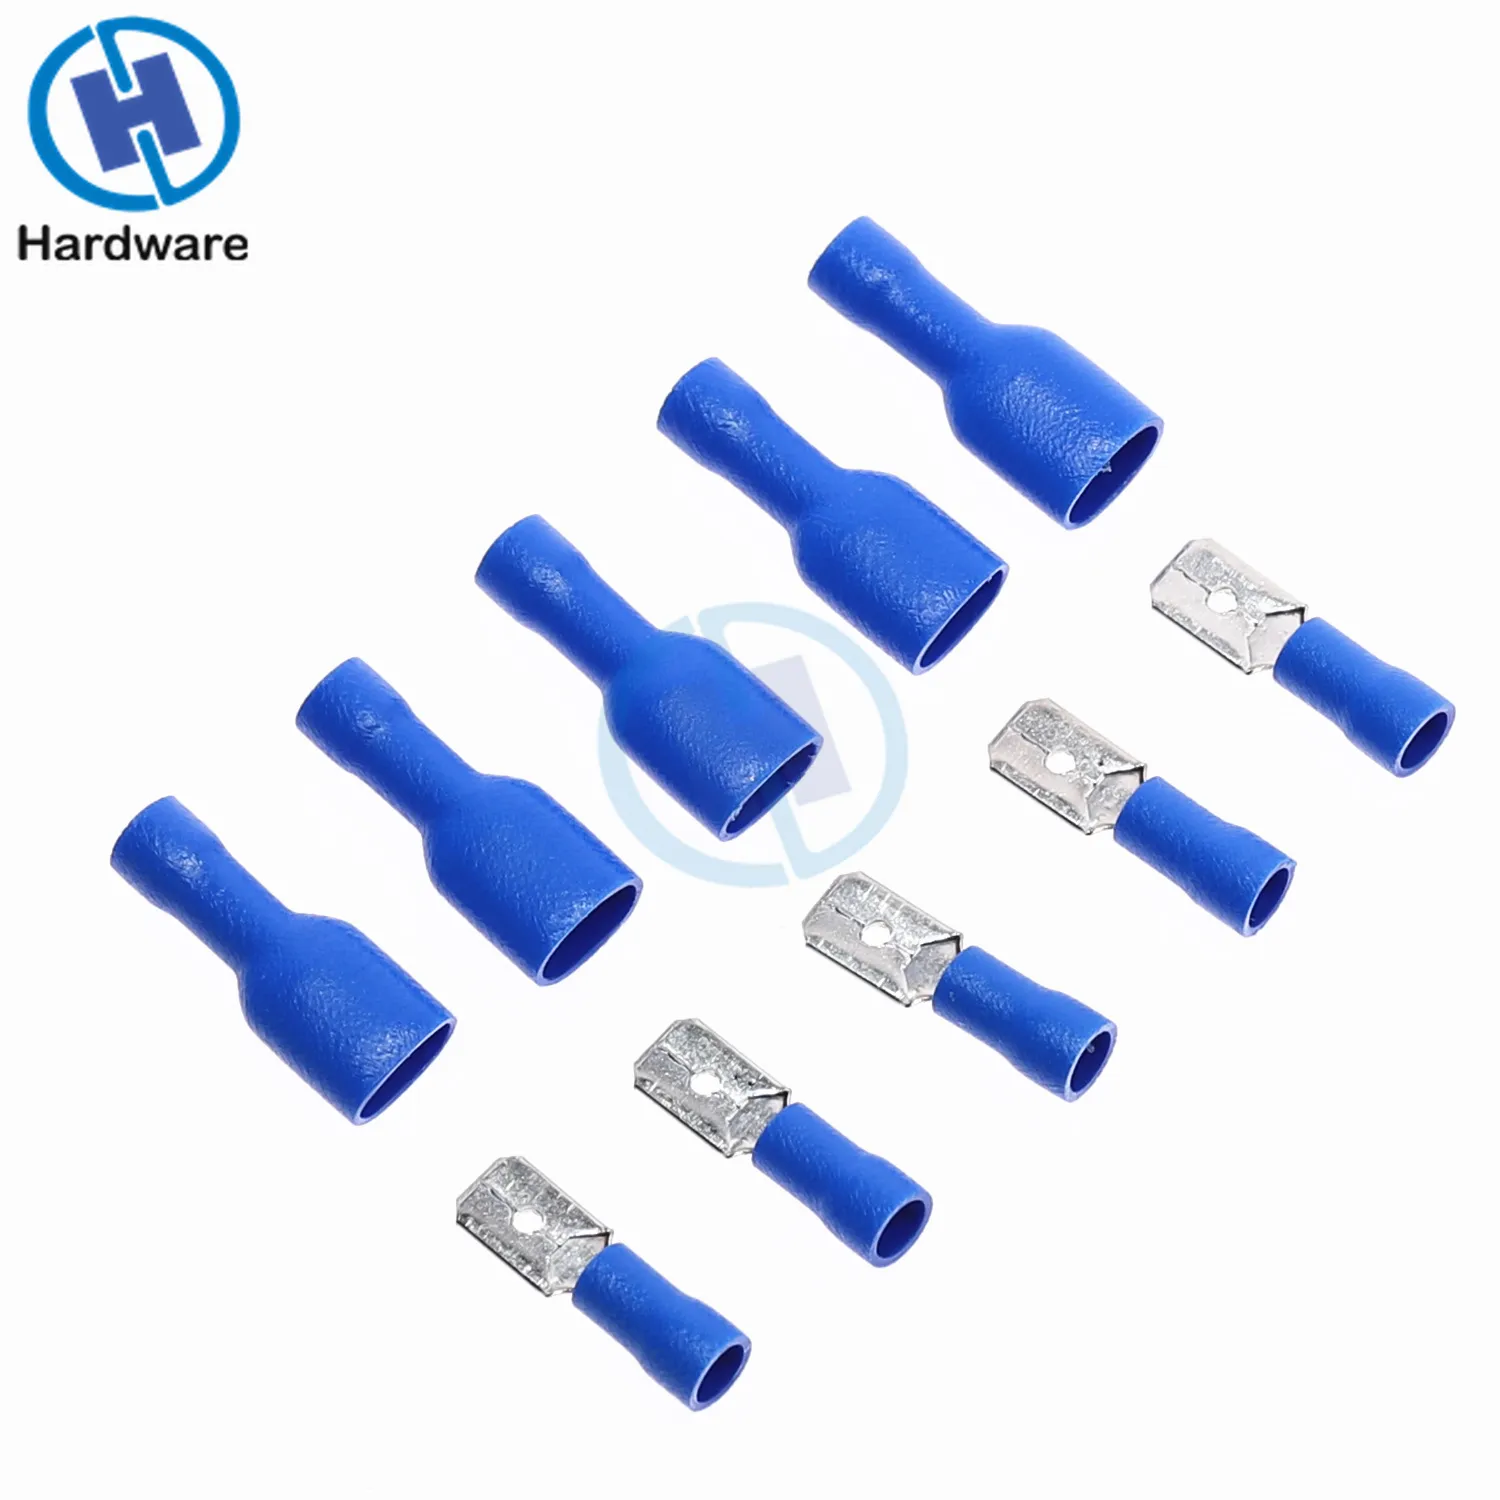 25 INSULATED ELECTRICAL WIRE TERMINAL CRIMP CONNECTOR SPADE KIT 16-14AWG BLUE 